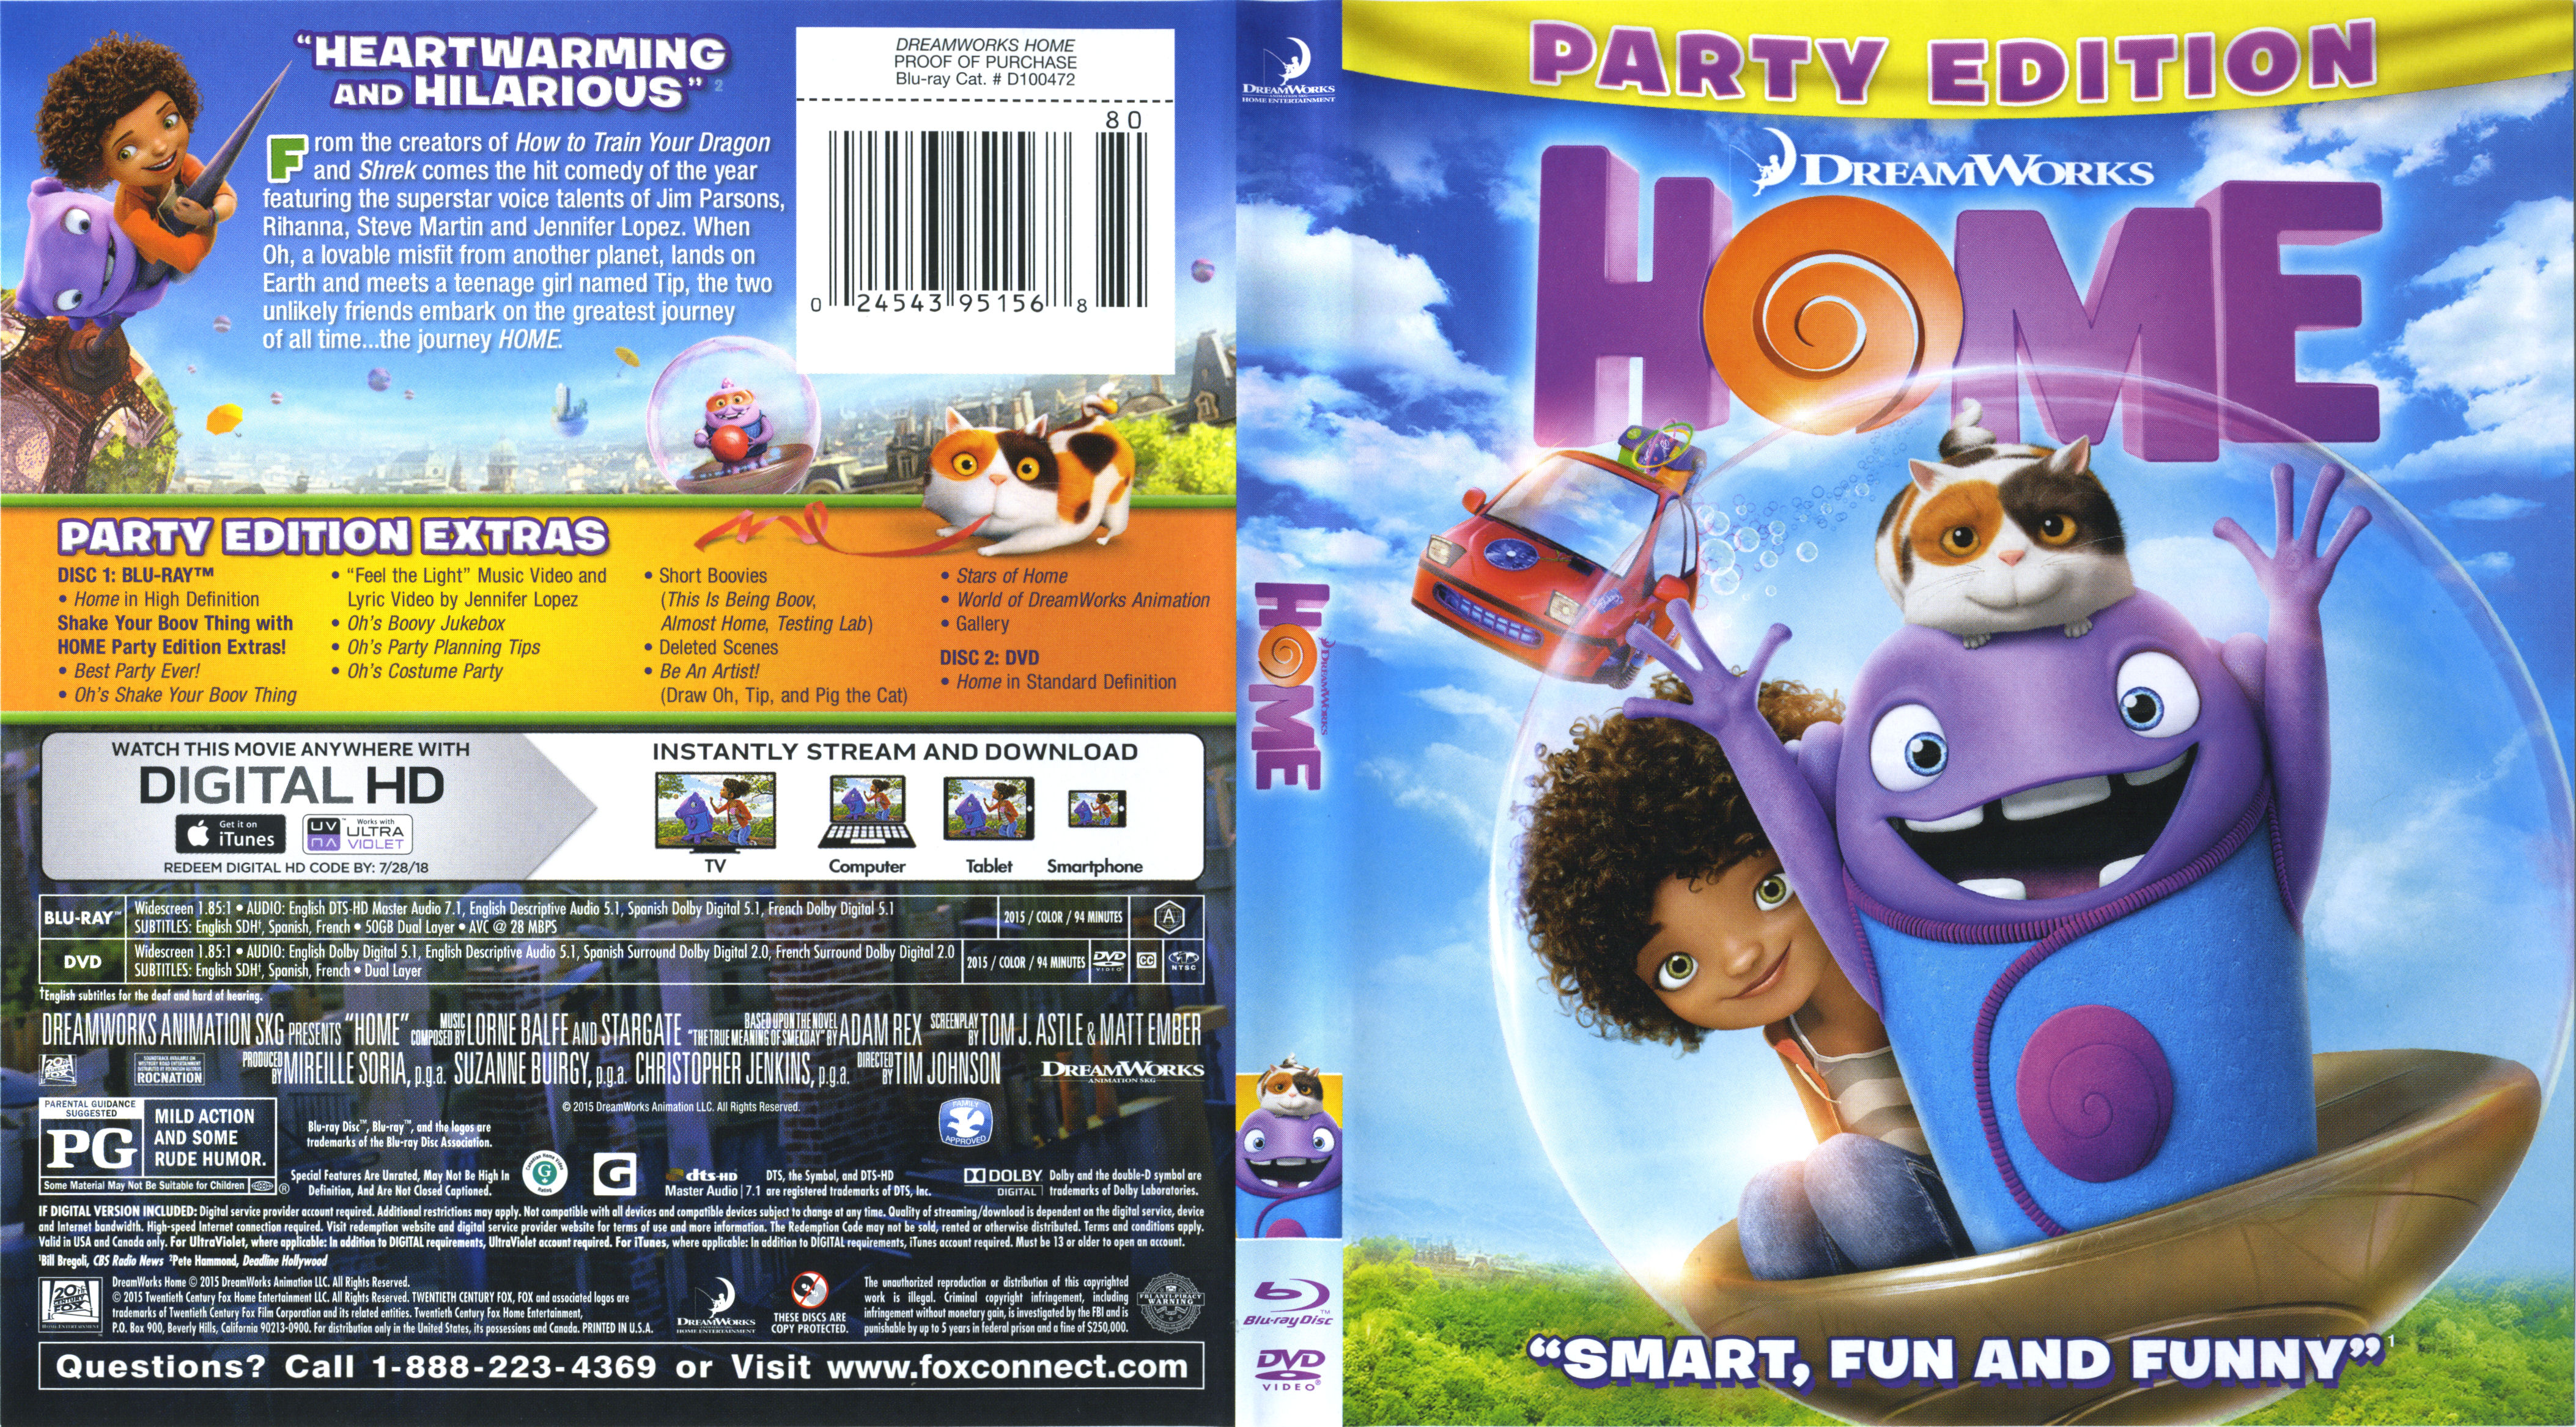 DVD Covers. 